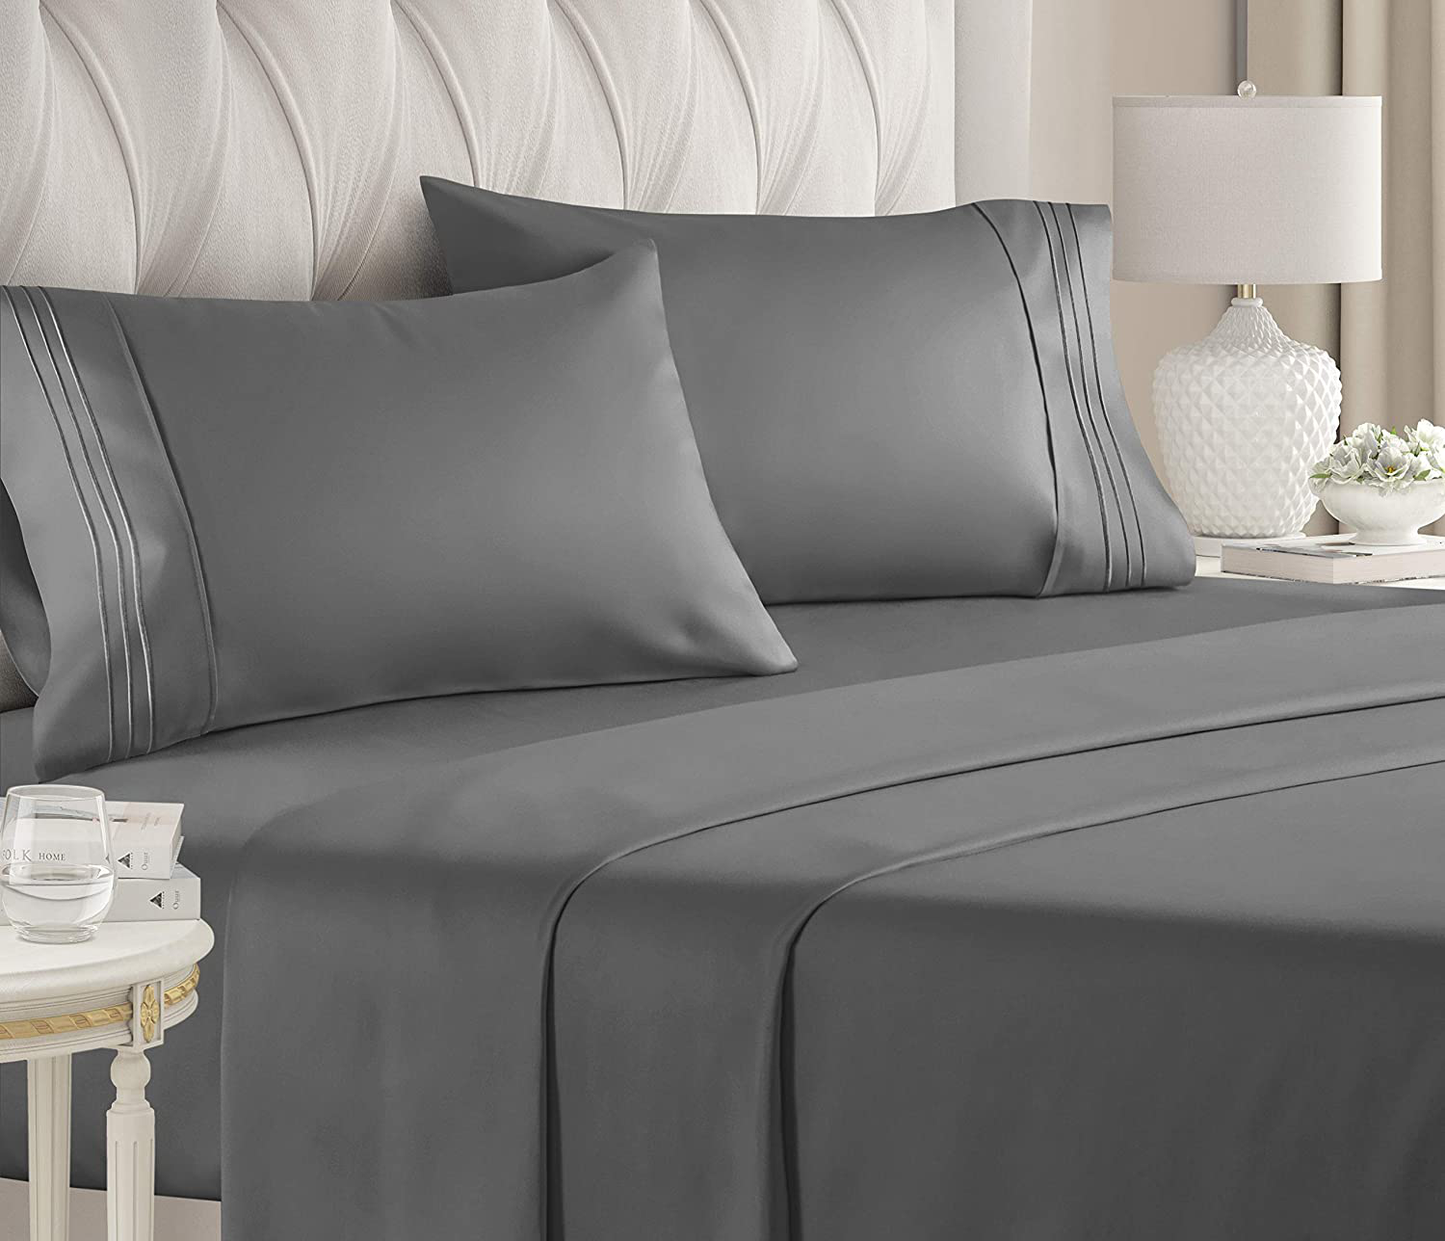 Hotel Luxury Bed Sheets - Extra Soft Bed Sheets - Deep Pocket Bed Sheets - Easy Fit - Breathable & Cooling - Wrinkle Free - Comfy